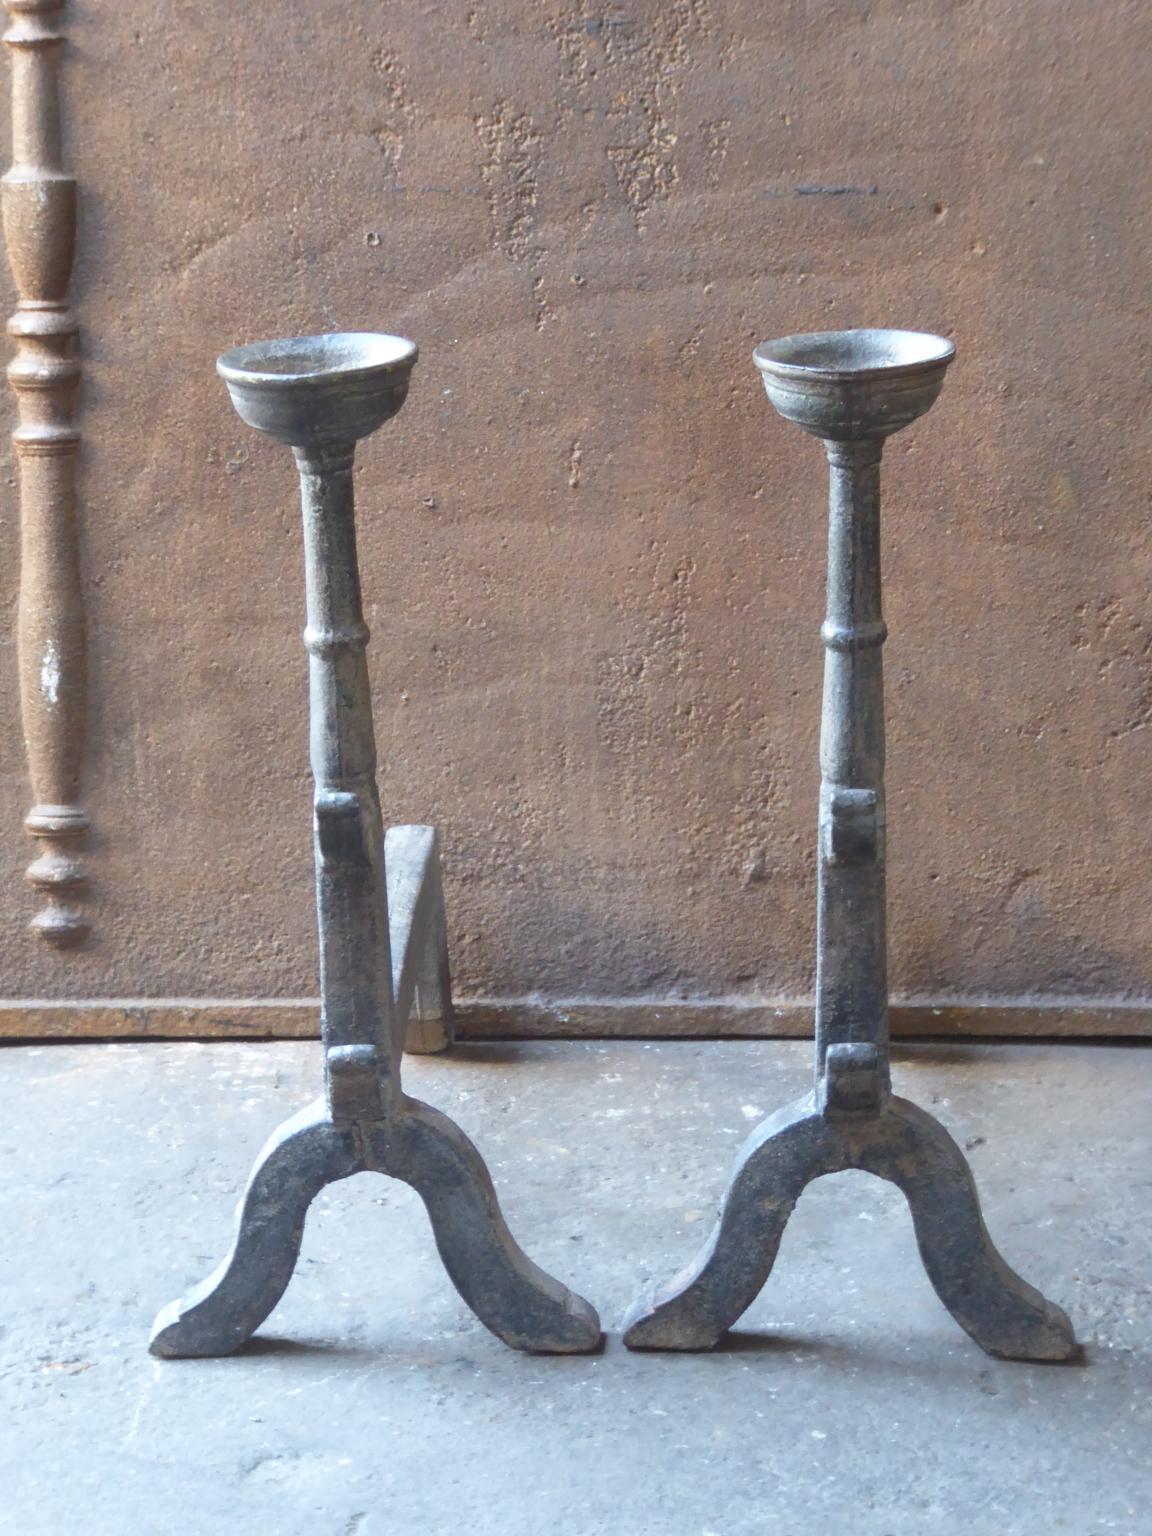 20th century French andirons made of cast iron. The style of the andirons is Gothic. The andirons have spit hooks to grill food and a cup to keep drinks warm. They are in a good condition.